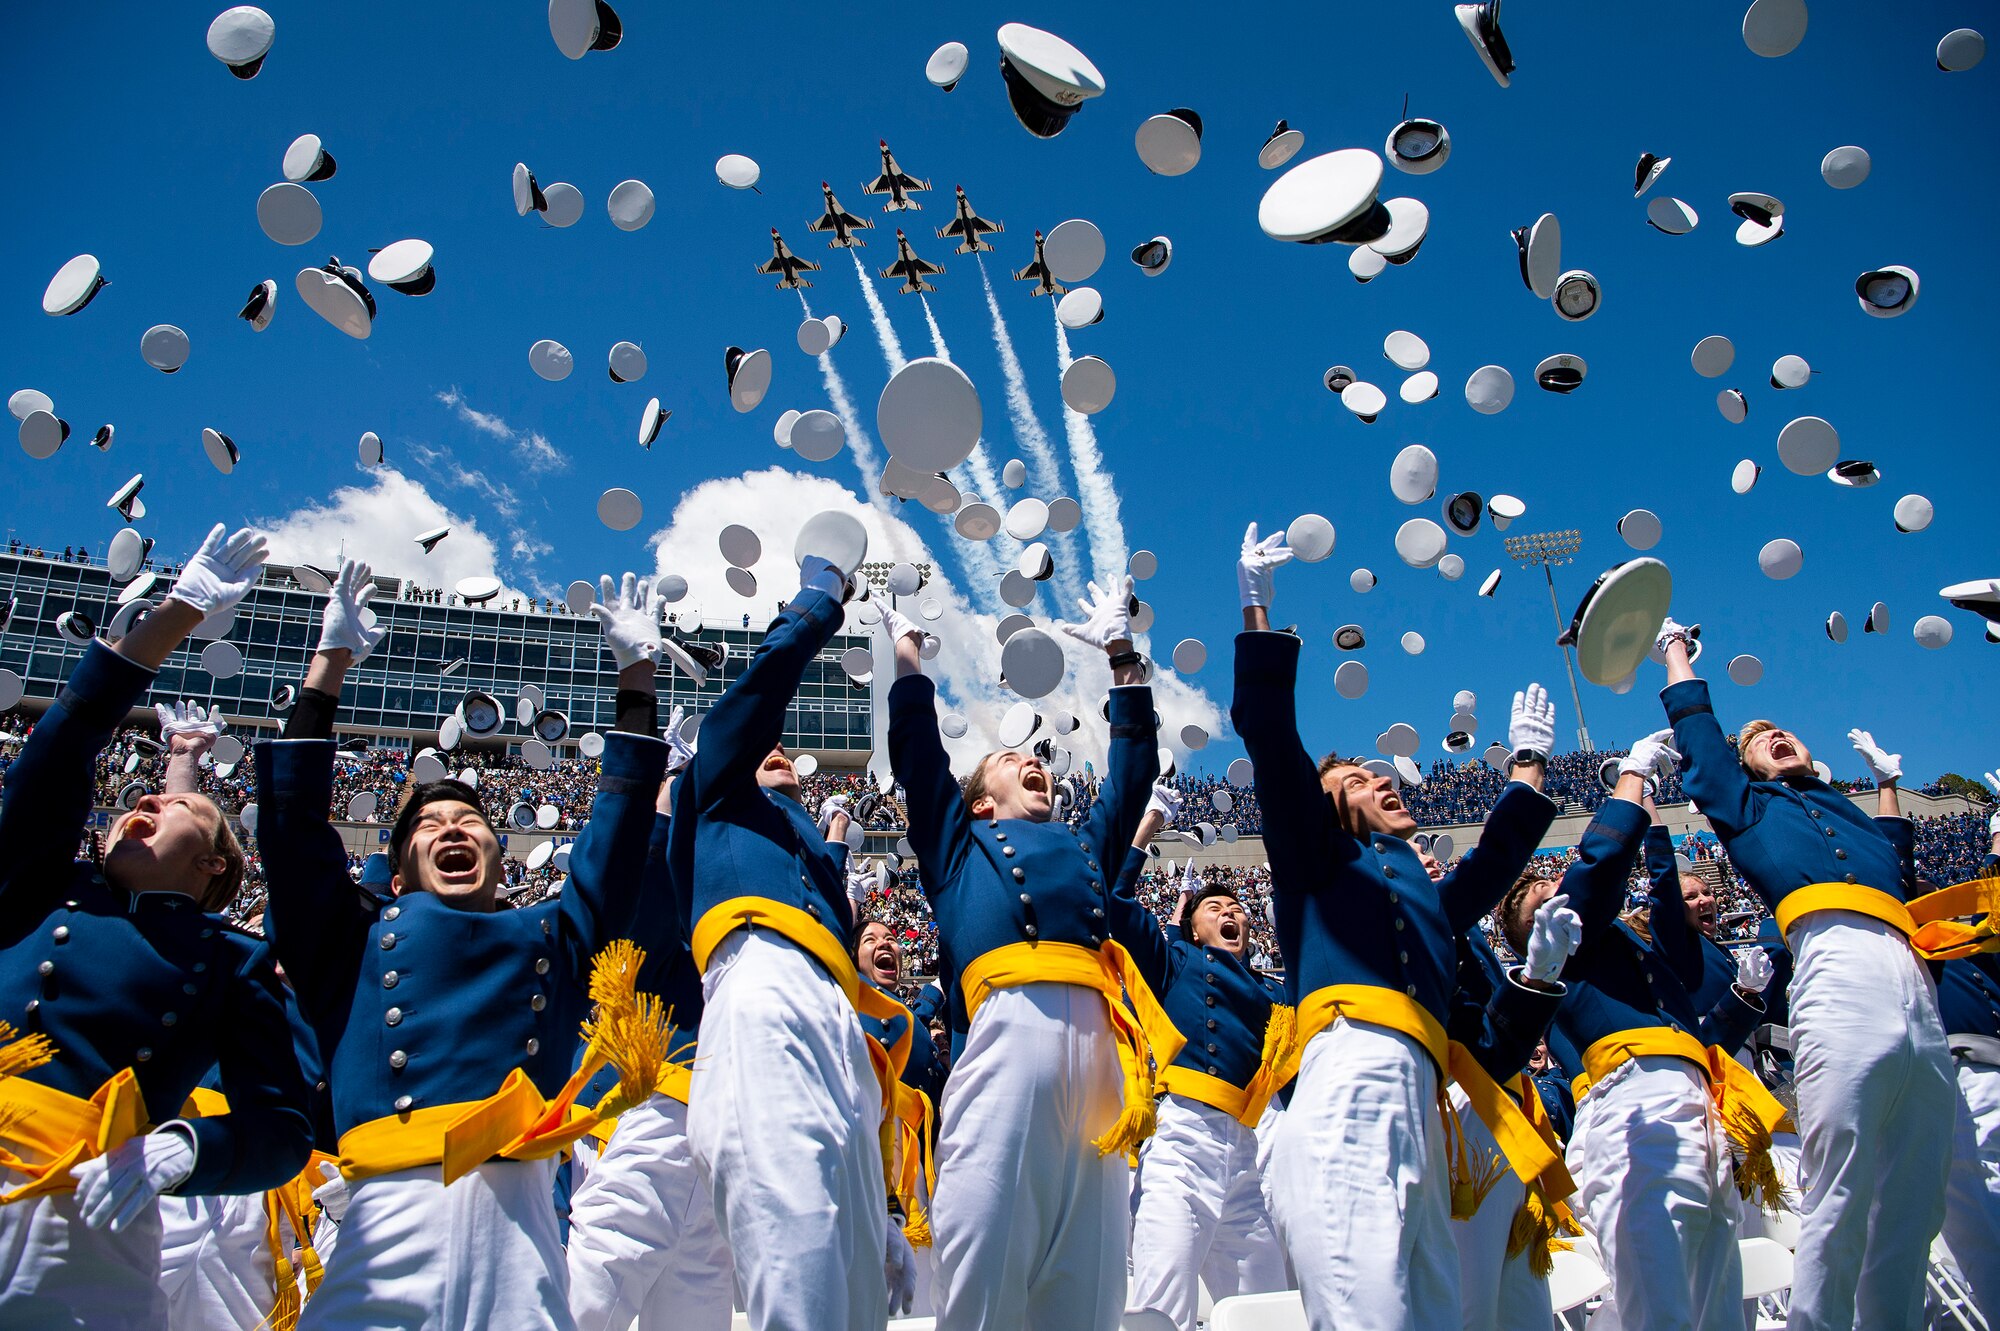 The U.S. Air Force Academy Class of 2022 graduates toss their hats into the sky